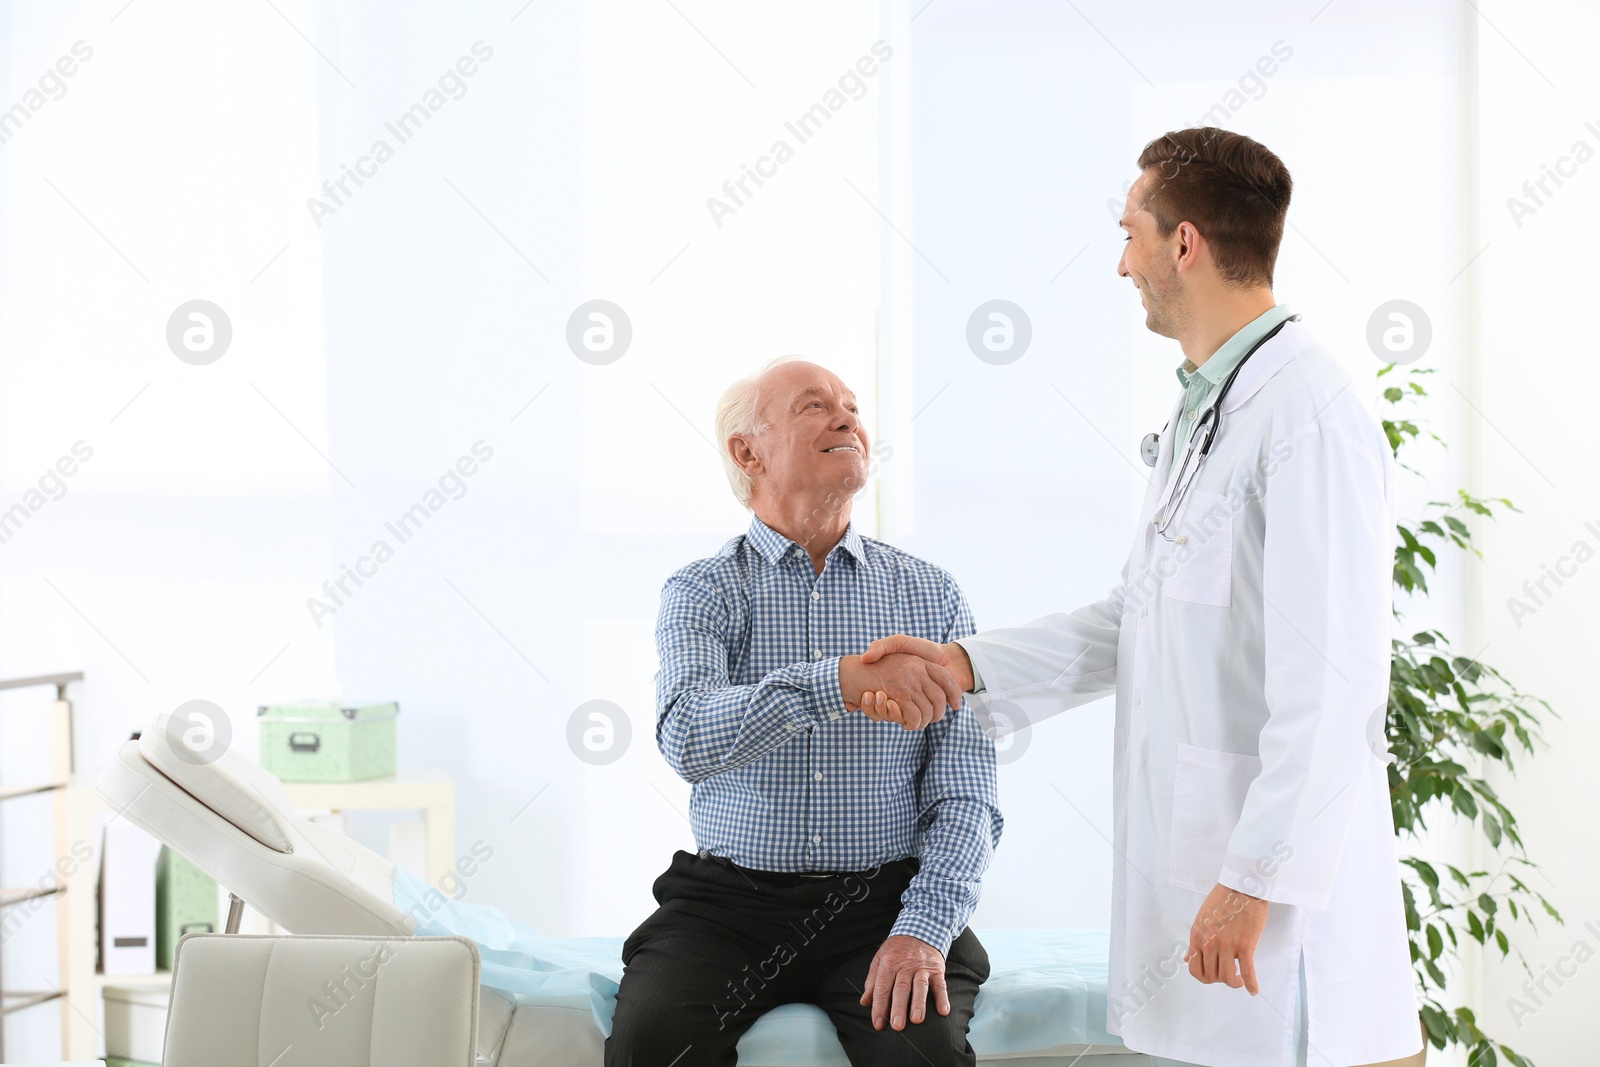 Photo of Doctor and elderly patient shaking hands in hospital. Space for text